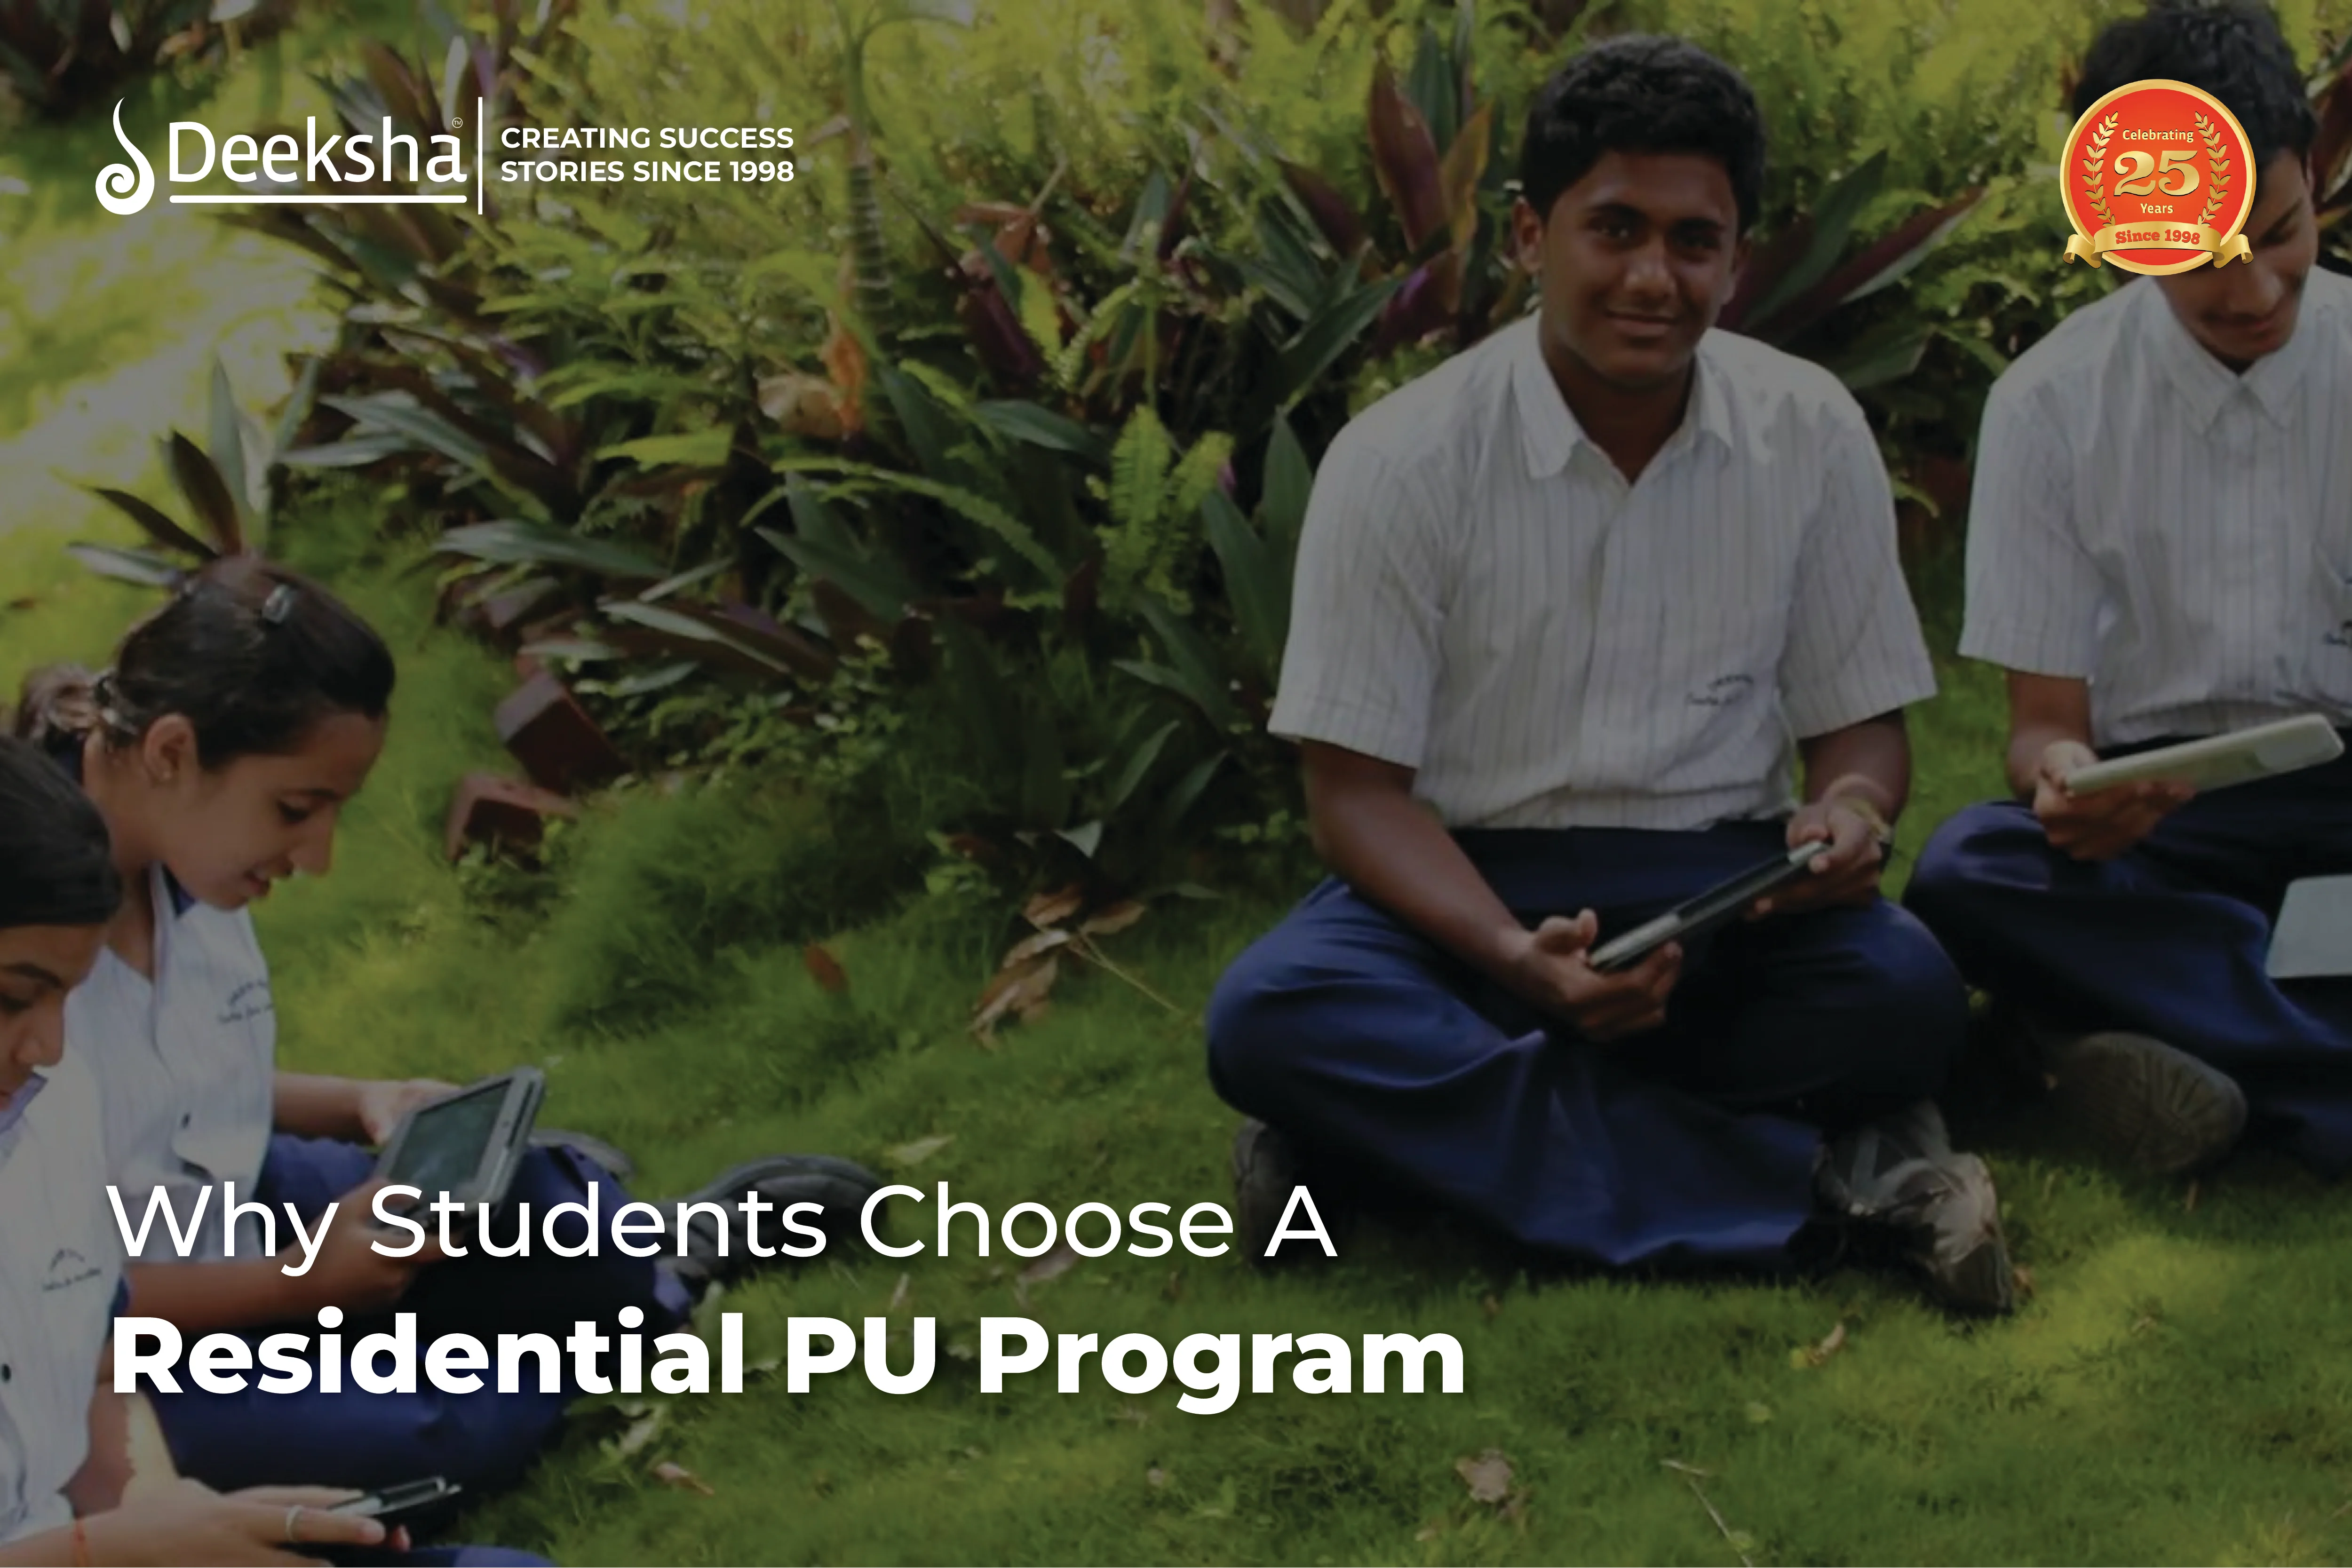 Why Students Choose A Residential PU Program